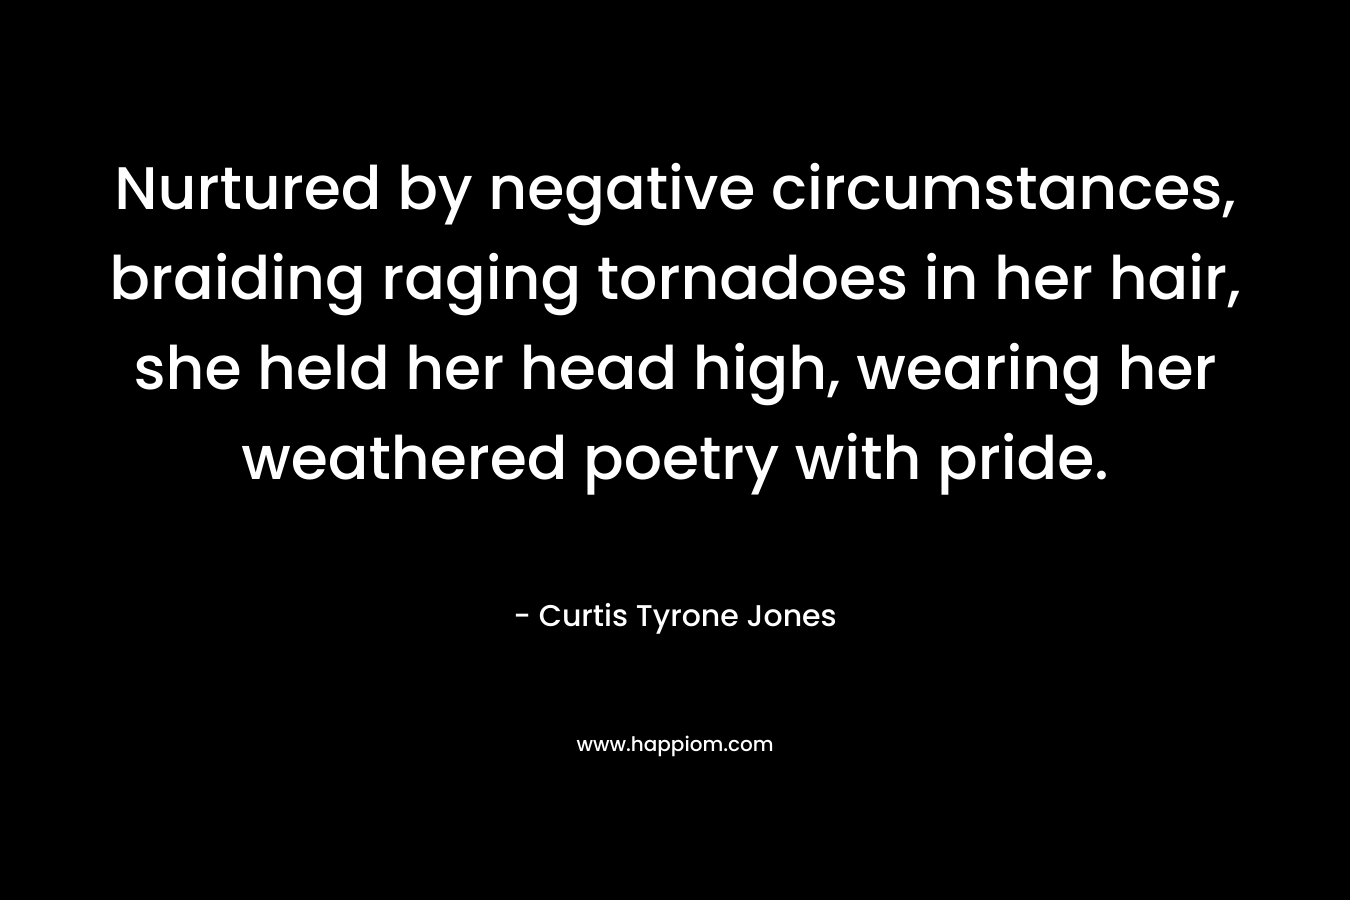 Nurtured by negative circumstances, braiding raging tornadoes in her hair, she held her head high, wearing her weathered poetry with pride. – Curtis Tyrone Jones